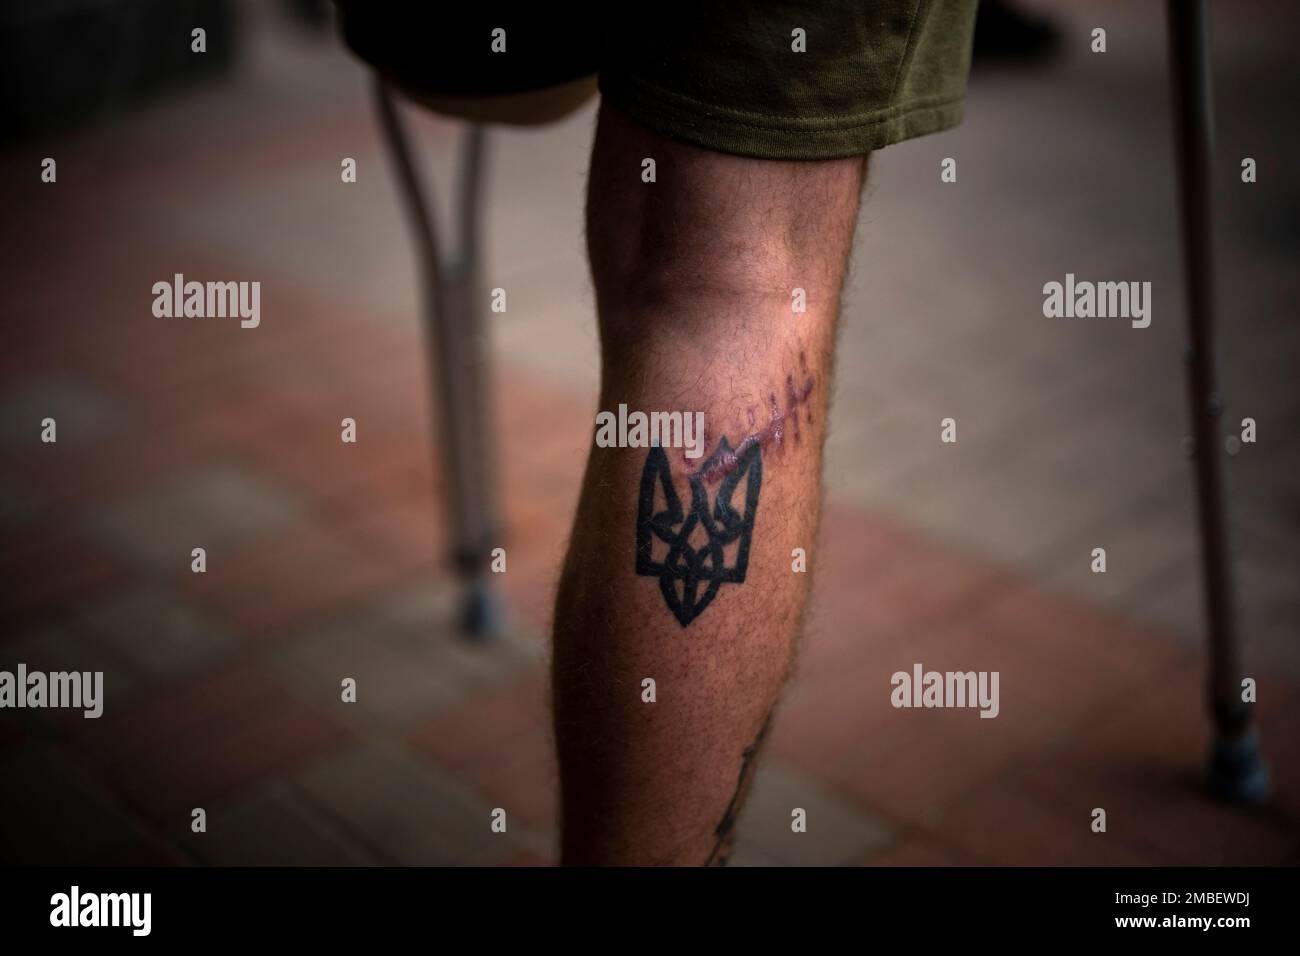 Soldier Vitalii Skidan, 26, of the Azoz Regiment, shows a tattoo of the Ukrainian  coat of arms crossed by a wound scar on his leg, while walking with  crutches to a rehabilitation